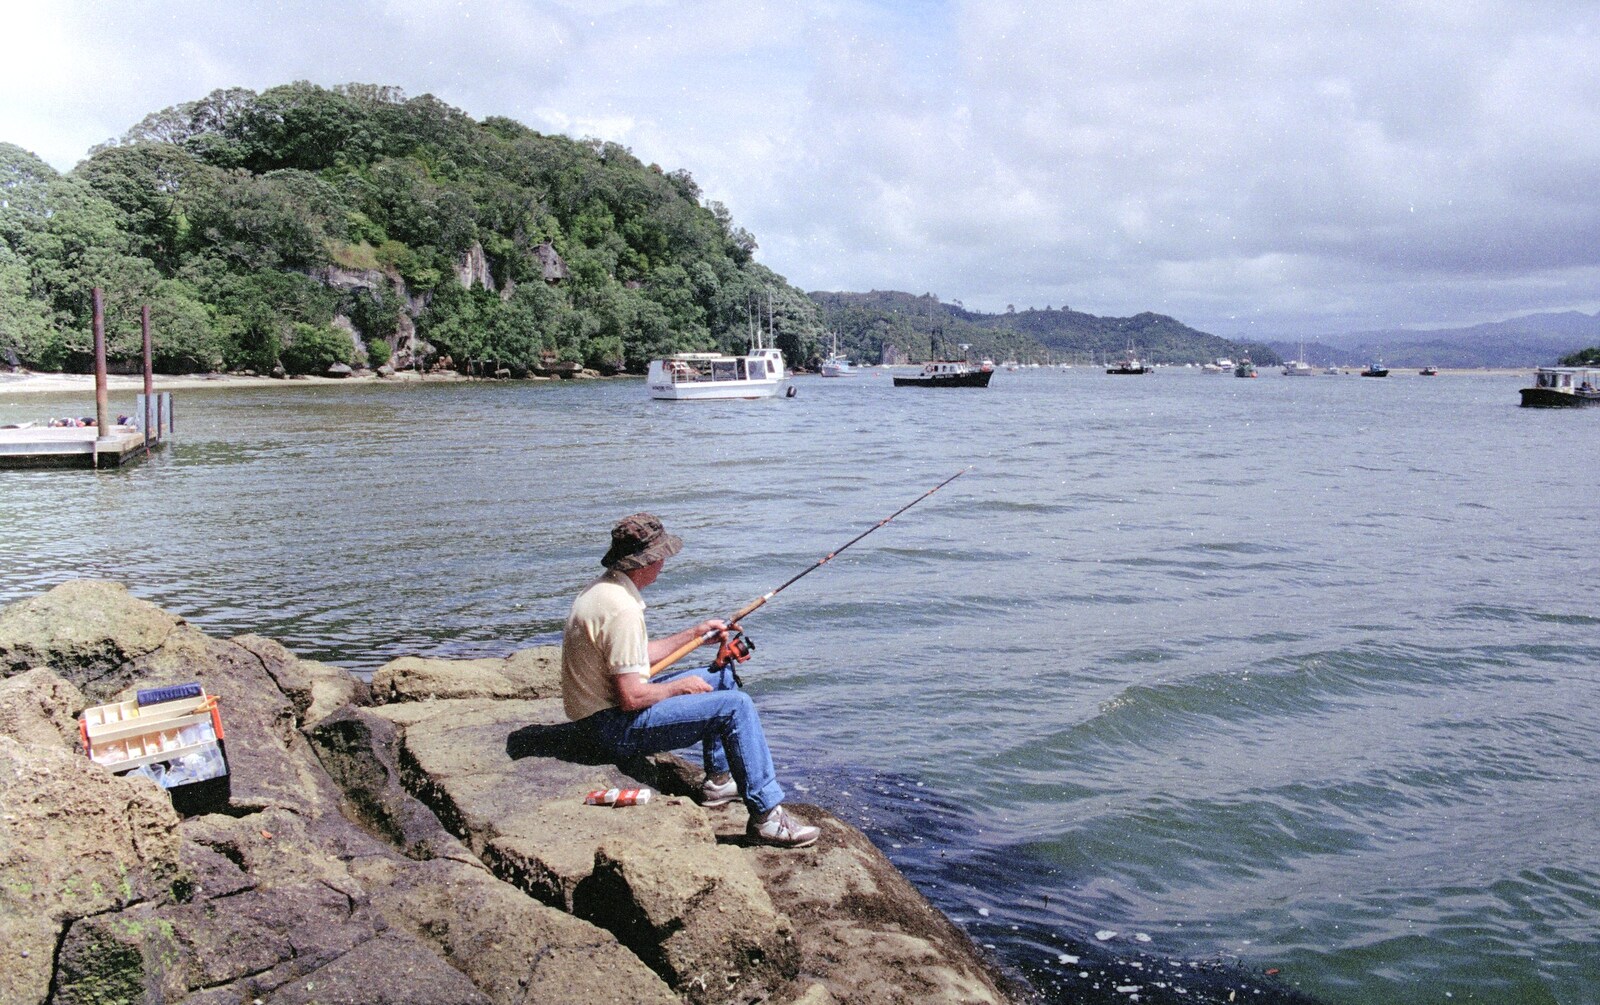 Clive sits on rocks and waits from Ferry Landing, Whitianga, New Zealand - 23rd November 1992